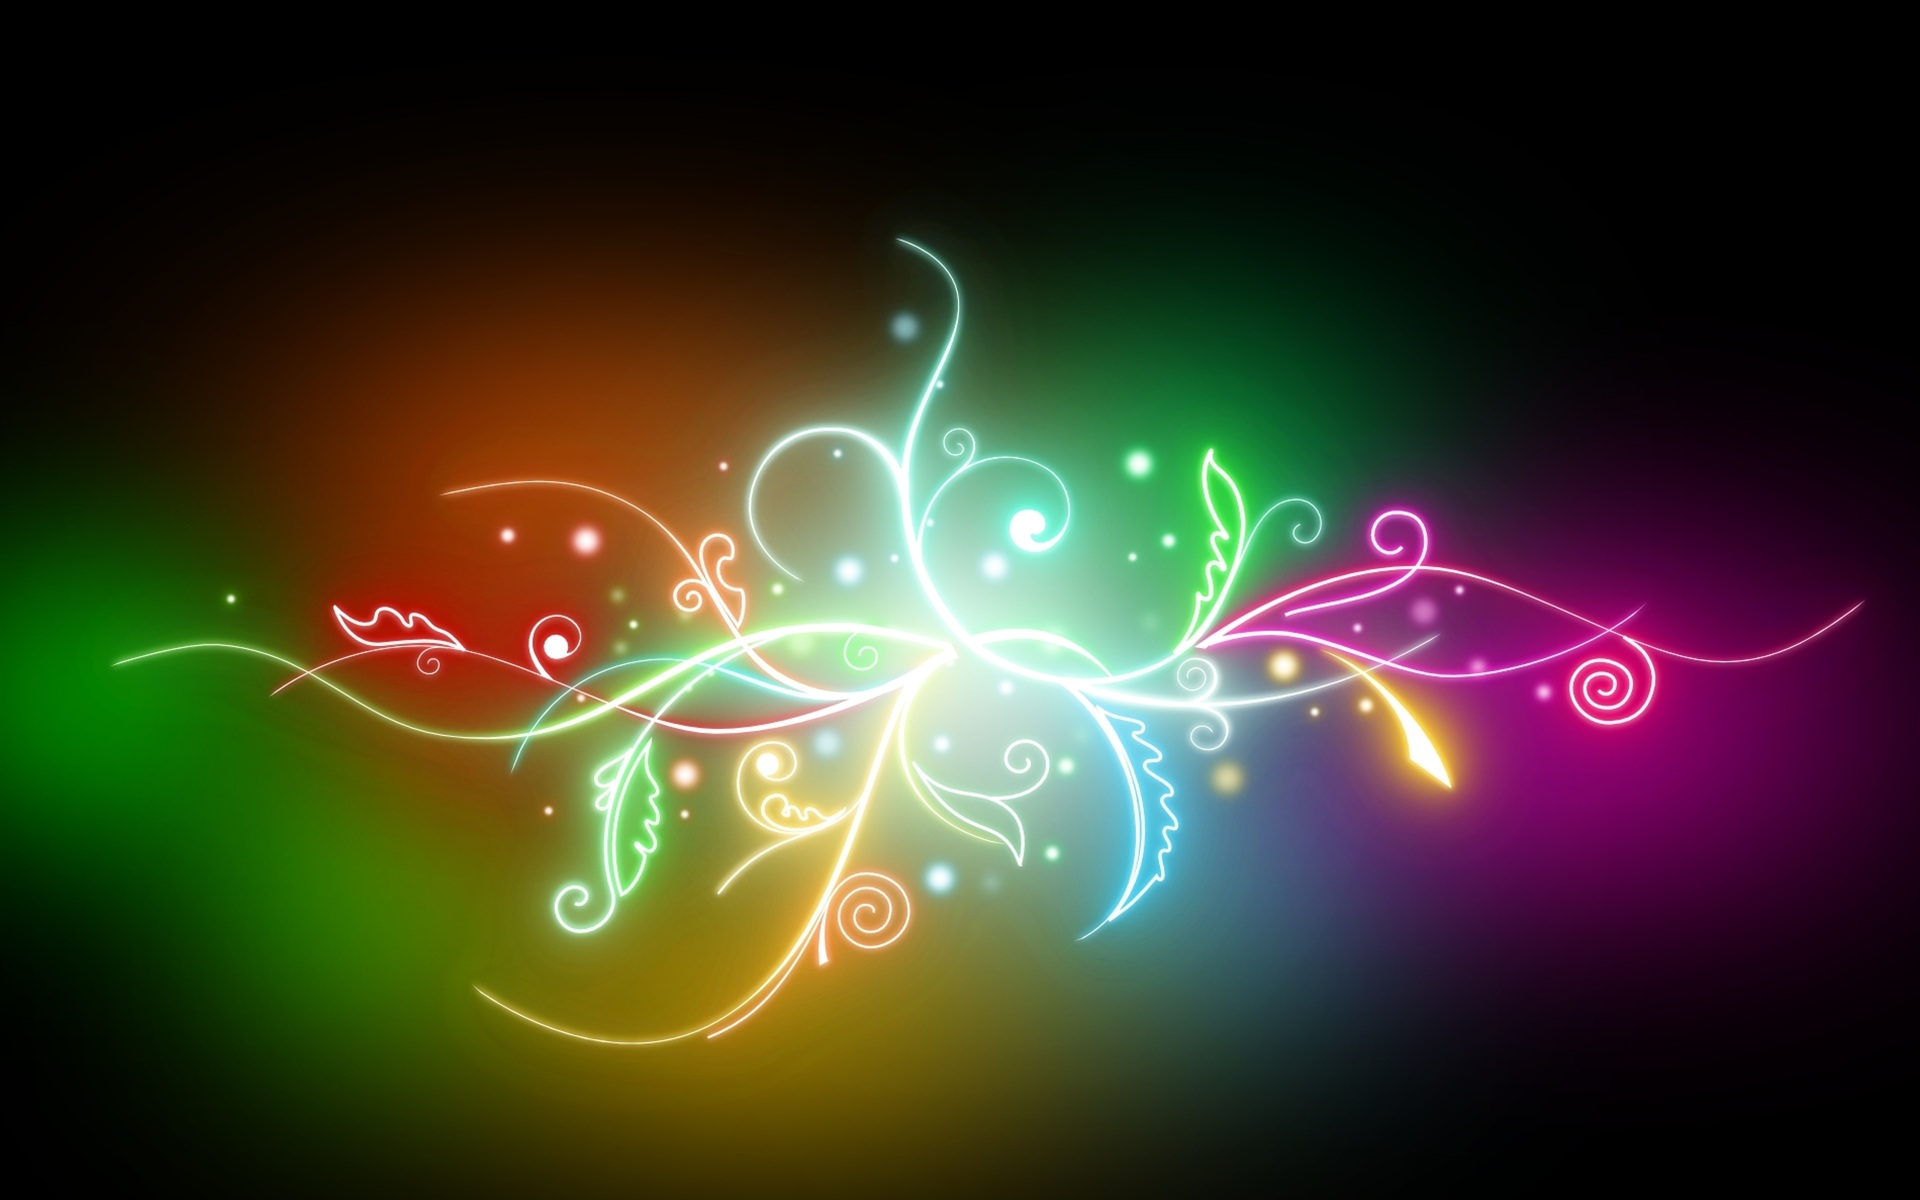 Colorful light leaves wallpaper | 3d and abstract | Wallpaper Better